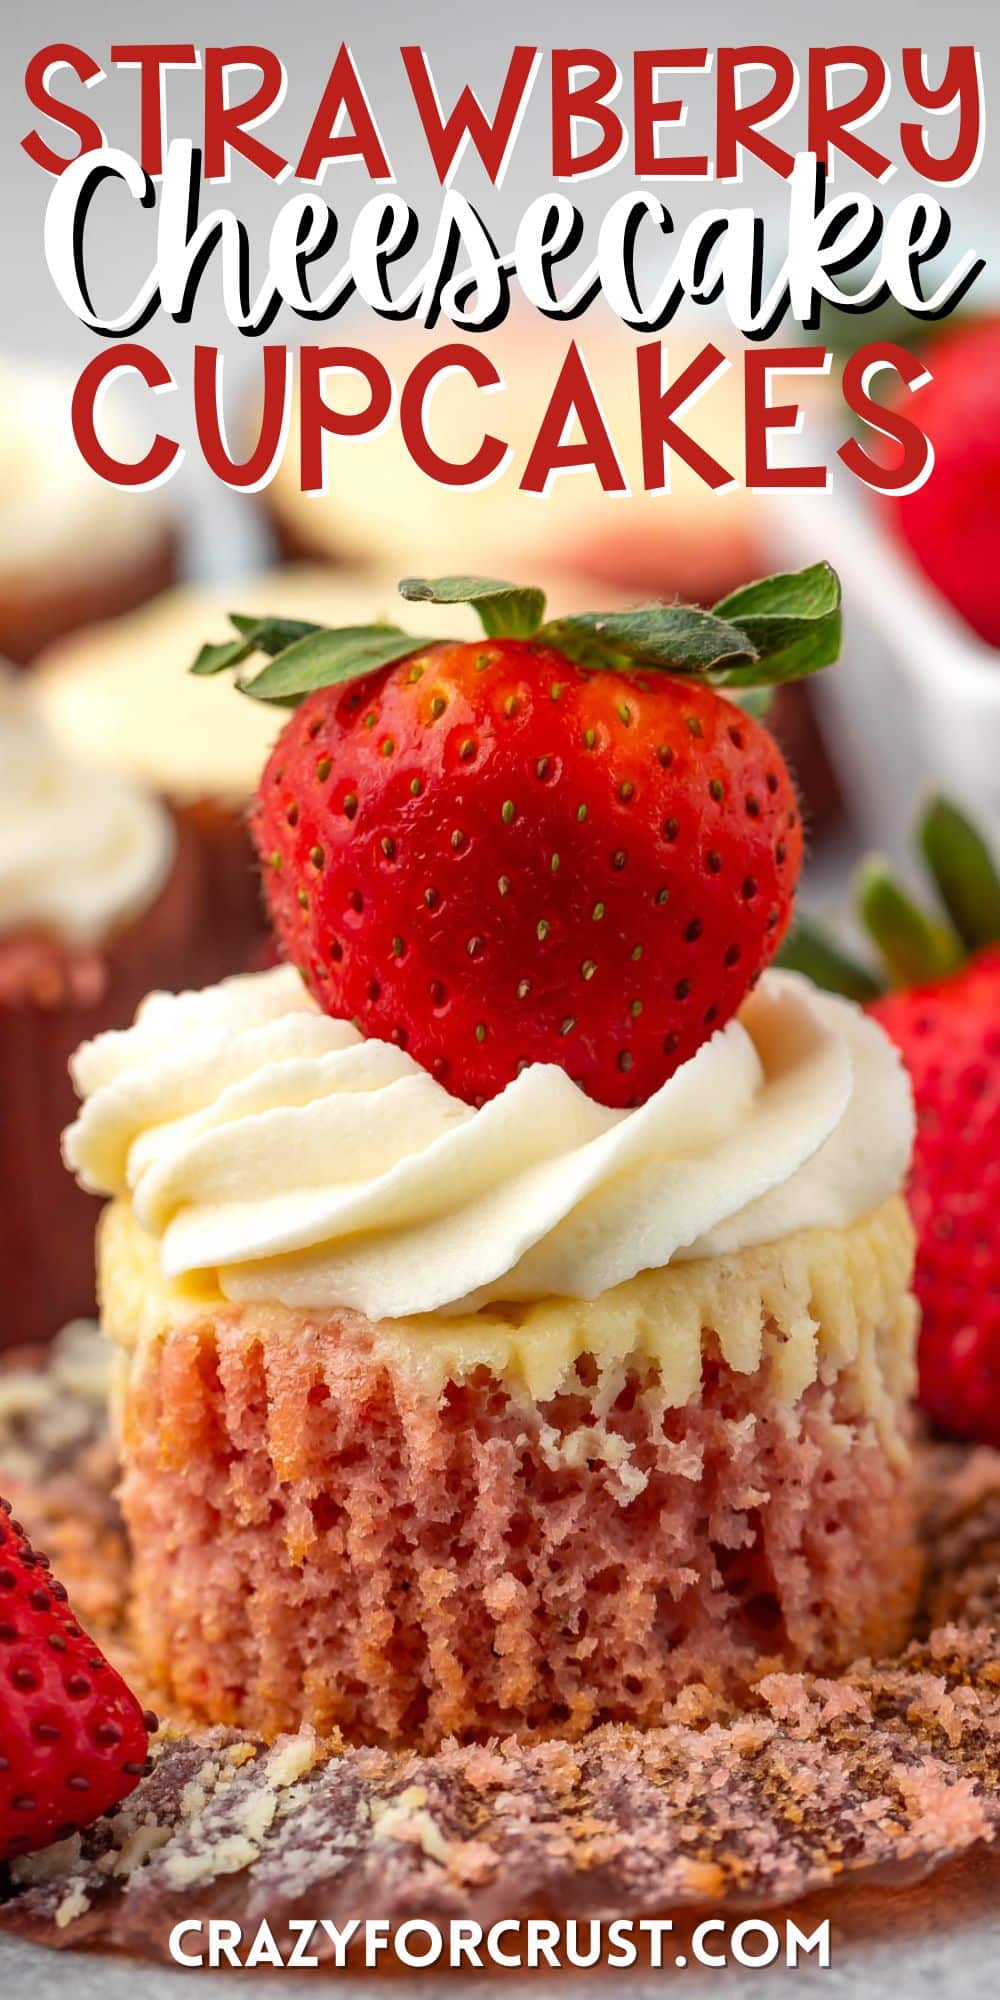 cupcake with white frosting and a strawberry on top with words on the image.